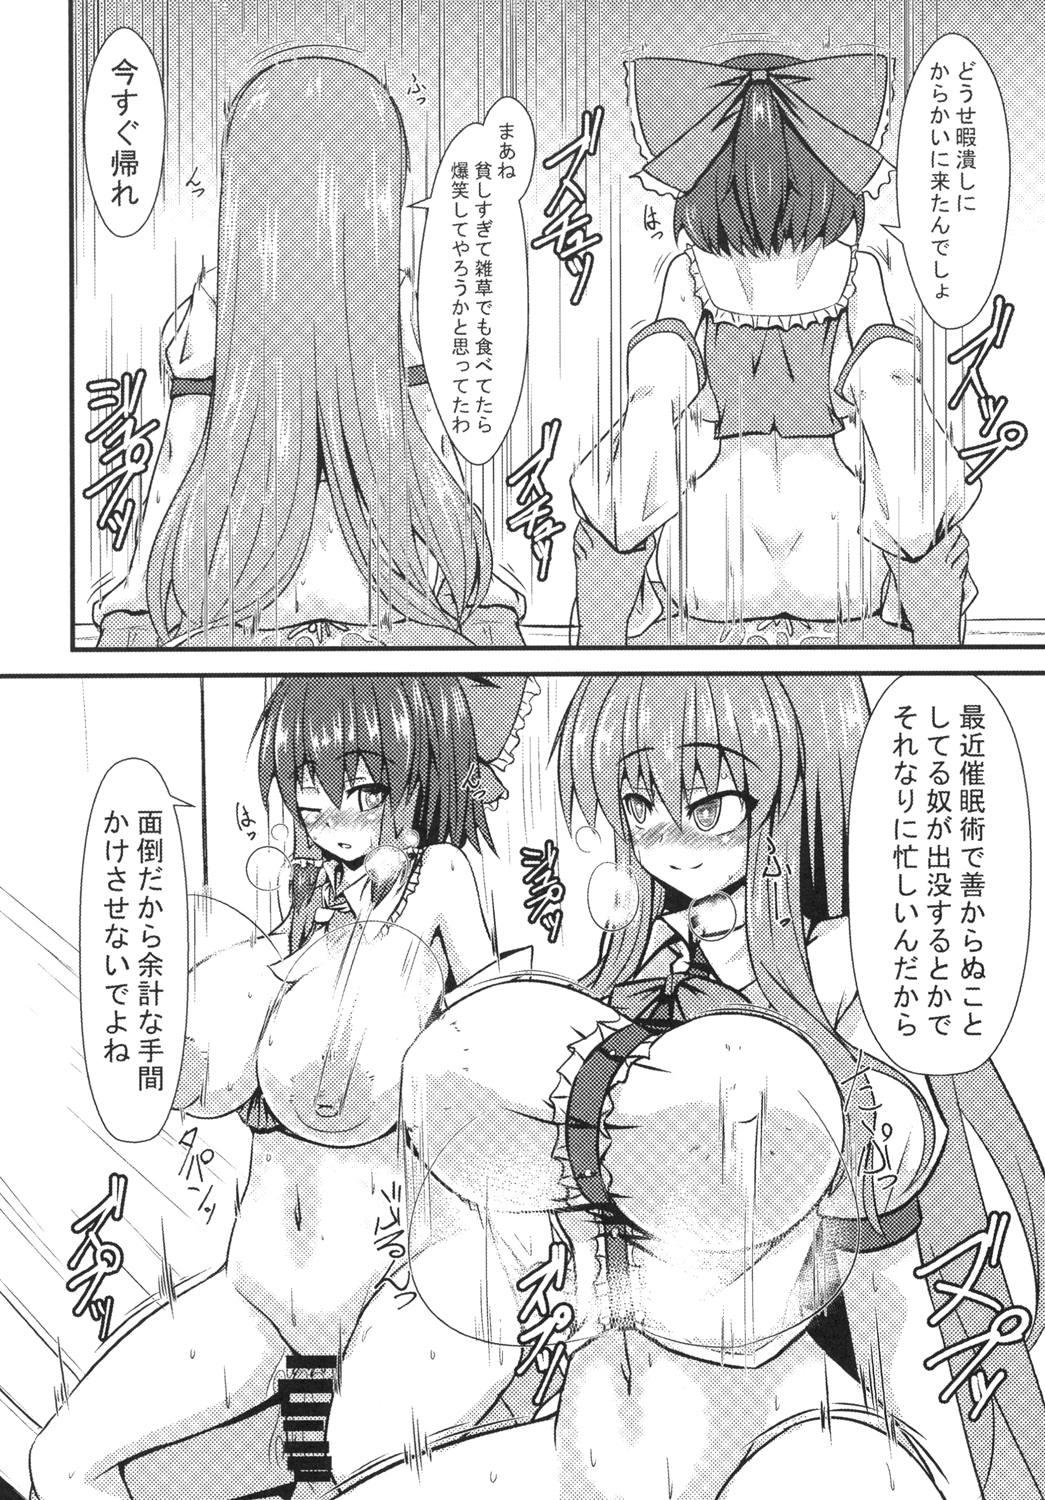 Messy Oppai Tenshi no Saiminx - Touhou project Mother fuck - Page 5